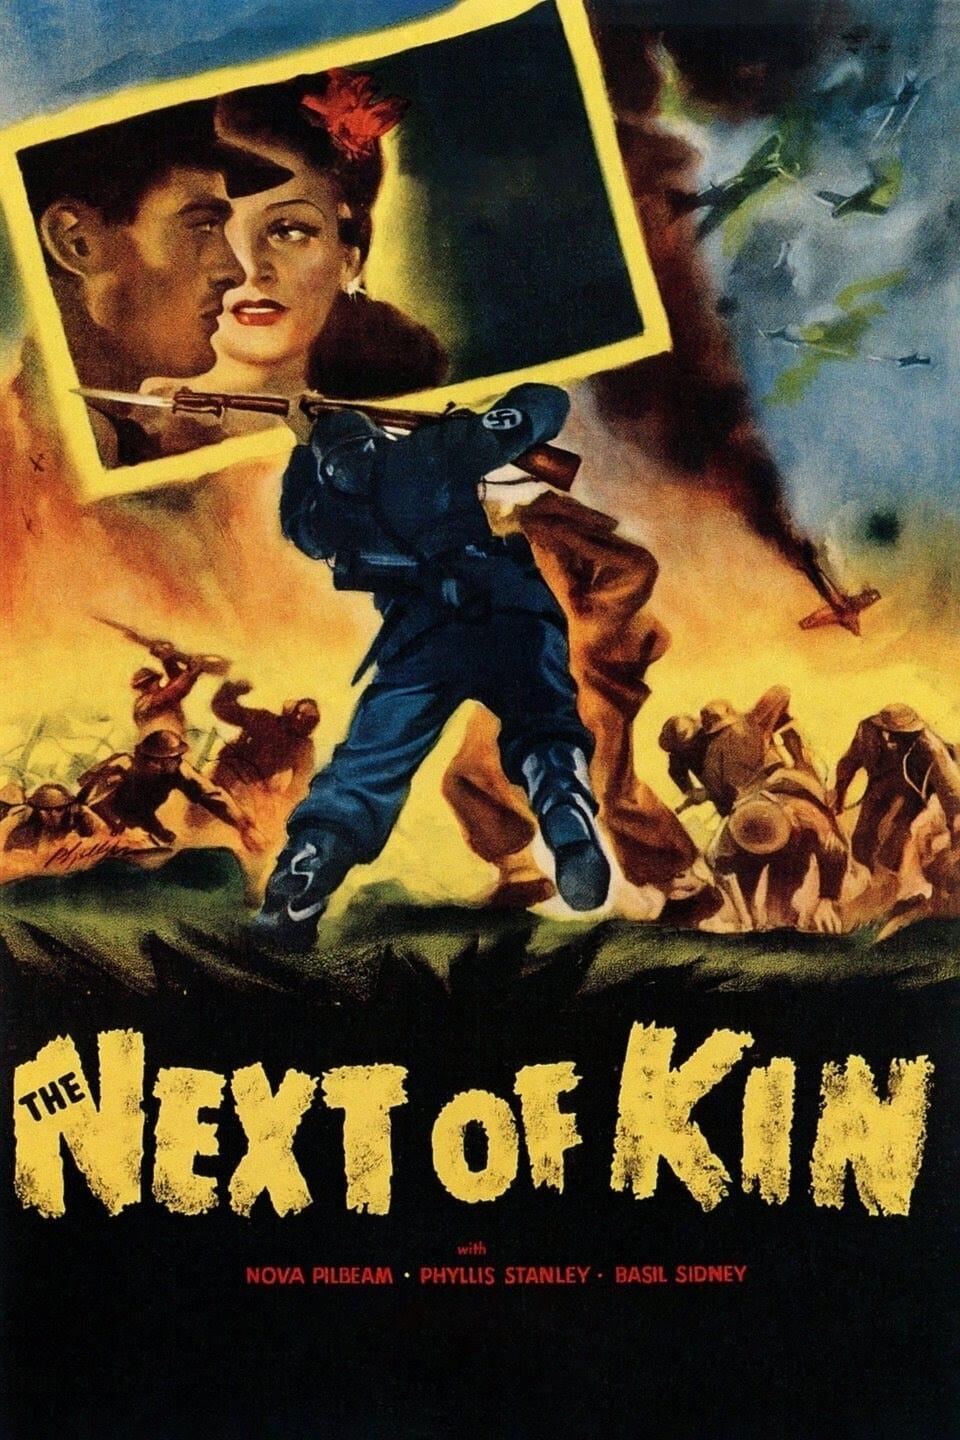 The Next of Kin poster